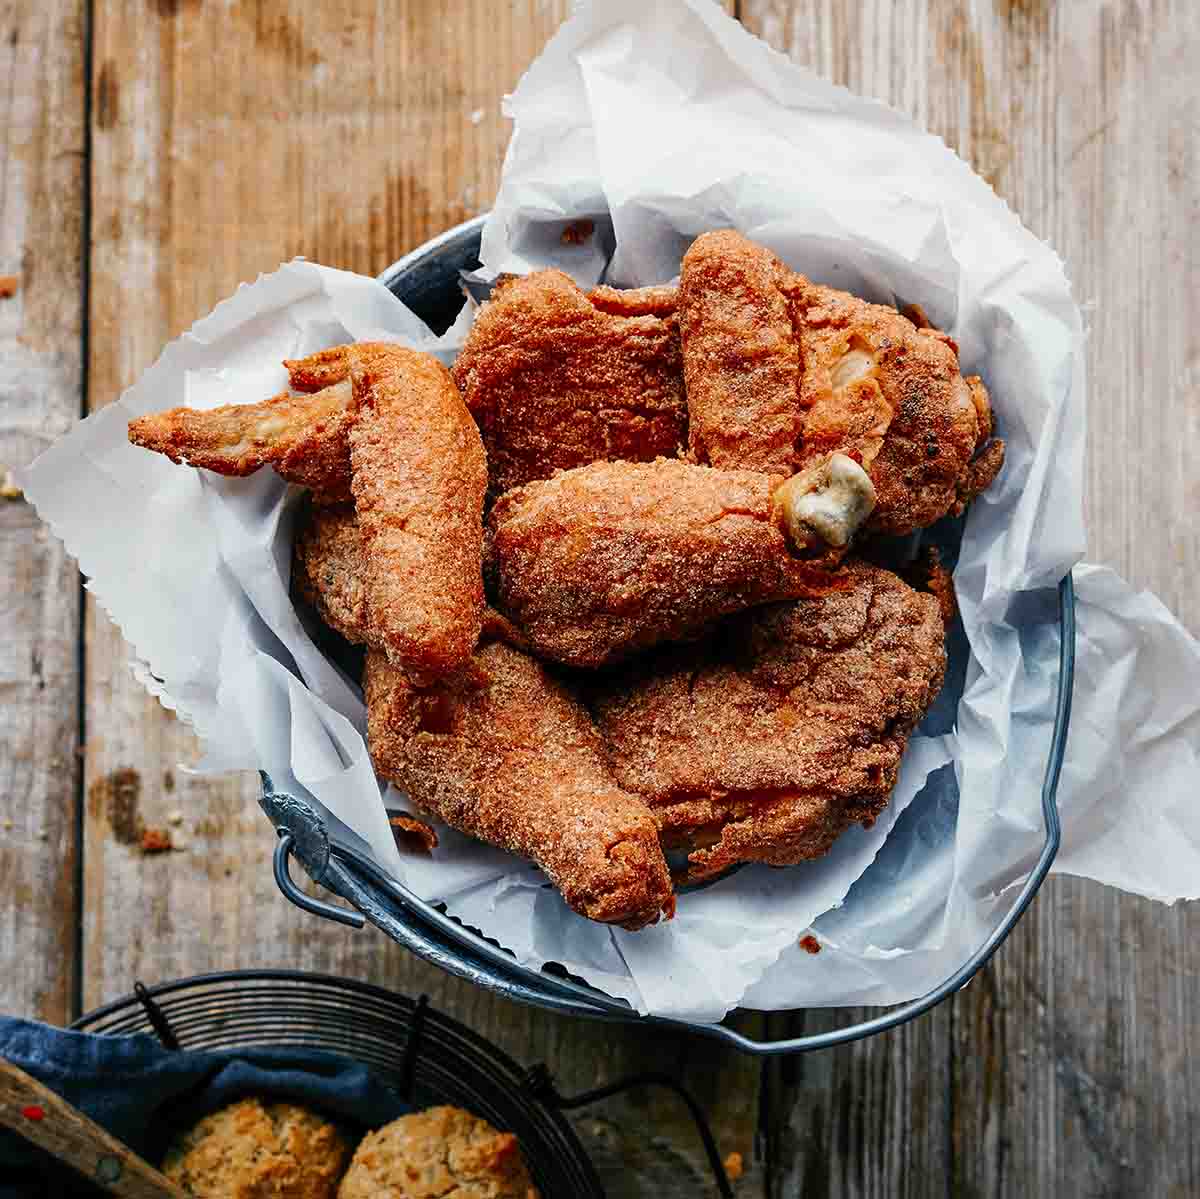 Several pieces of gluten-free dairy-free fried chicken in a parchment-lined metal bucket.